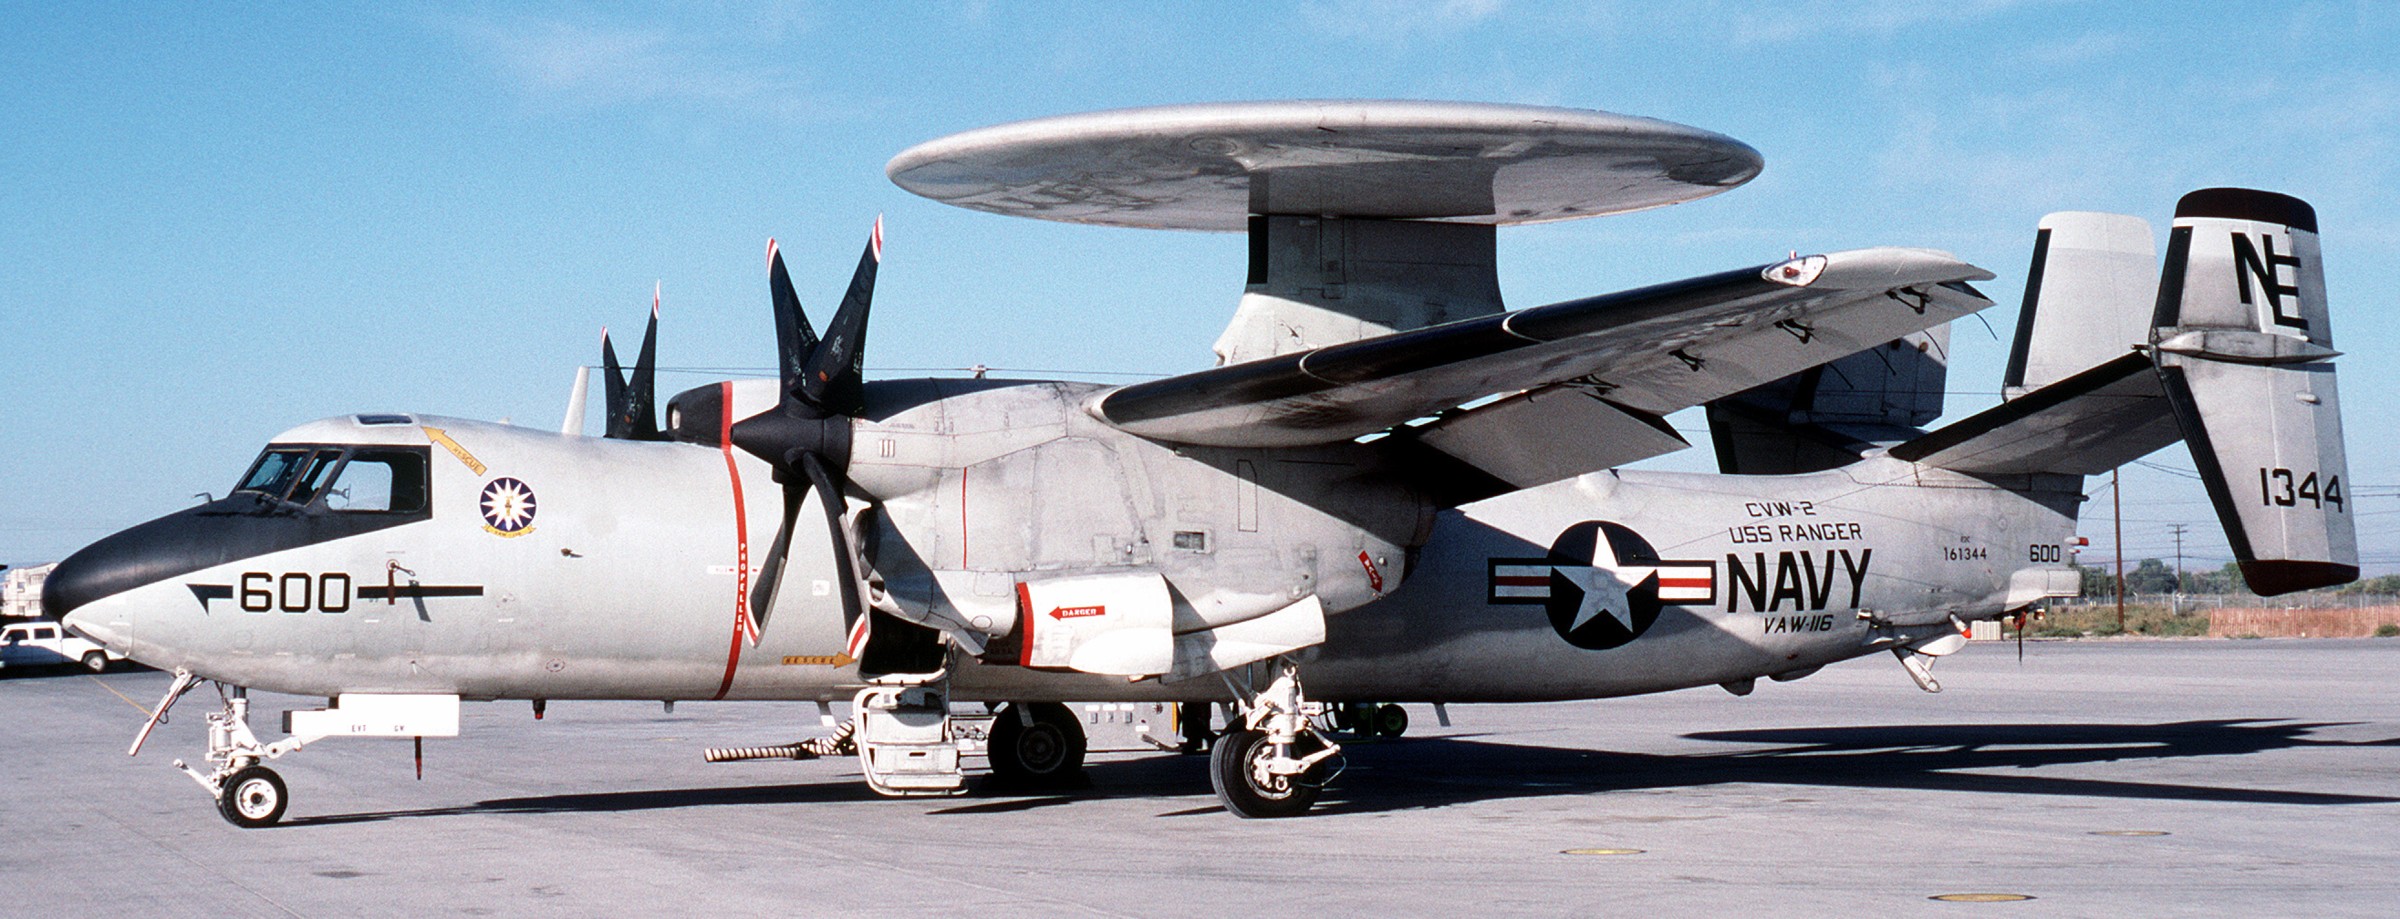 vaw-116 sun kings airborne command control squadron carrier early warning cvw-2 nas fallon nevada 120